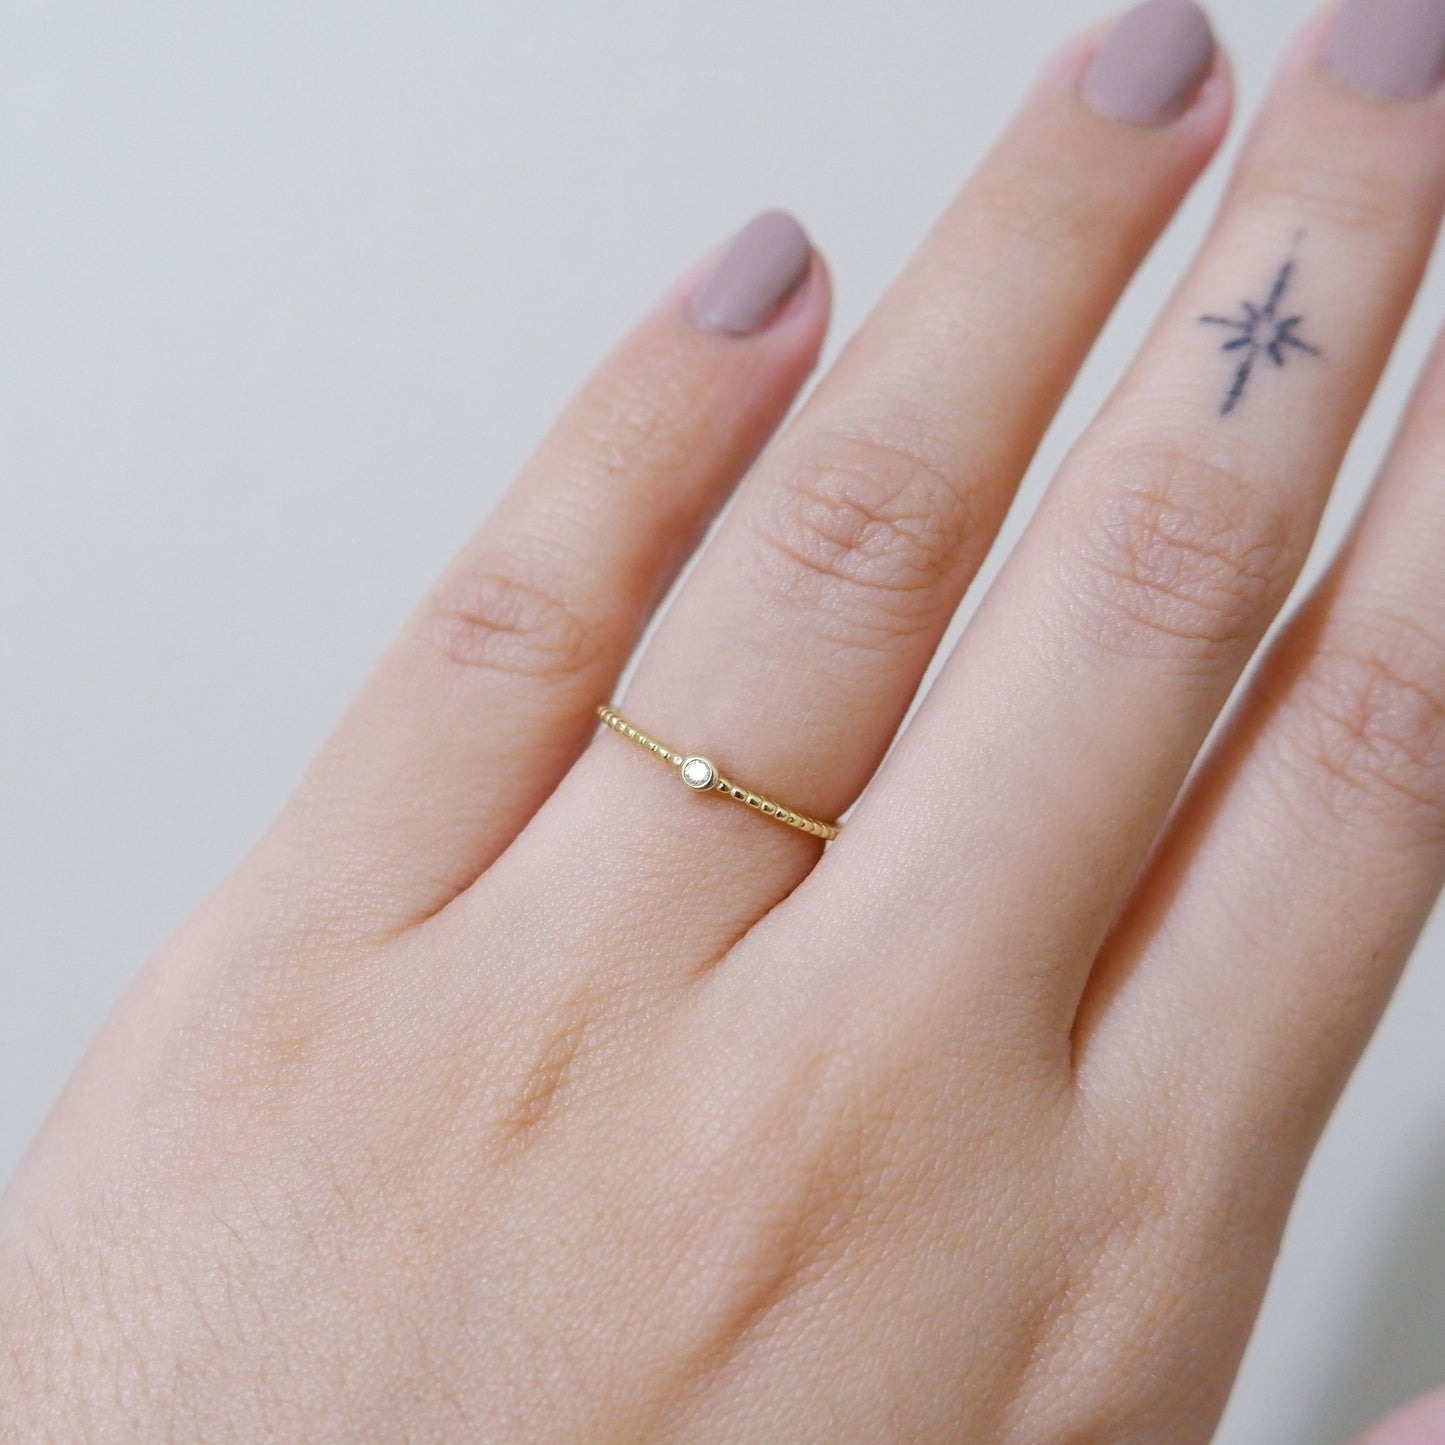 The Petite Dotted Bead Ring